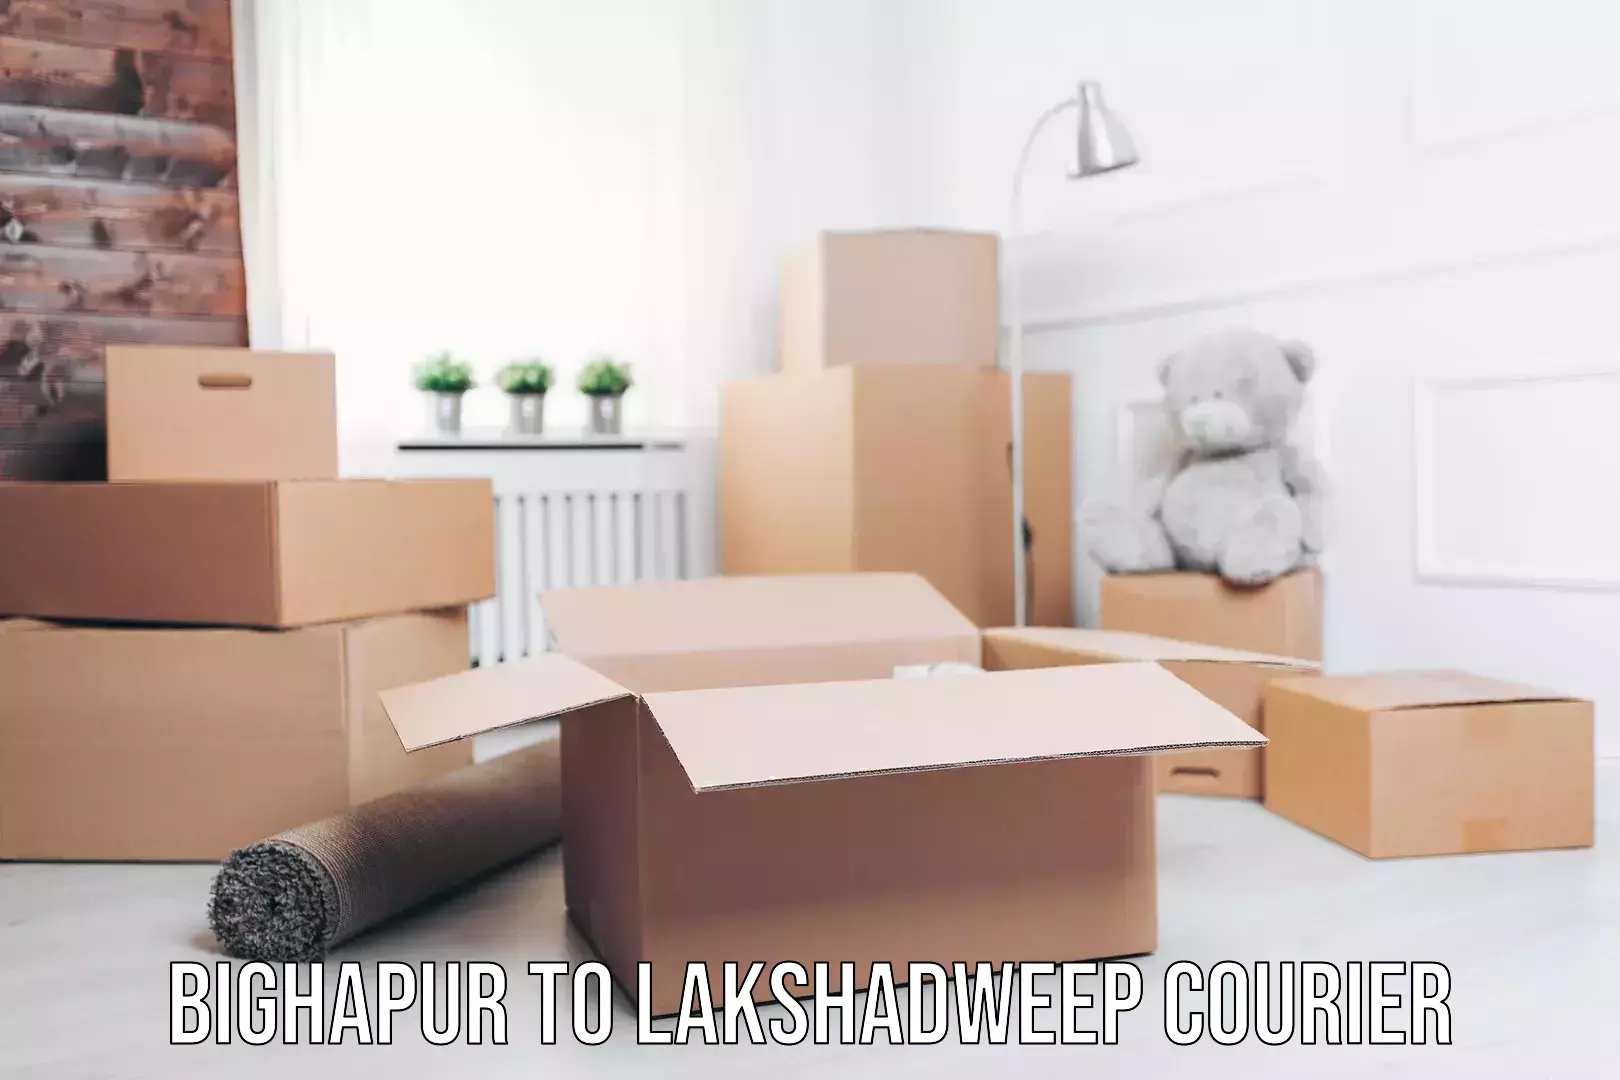 Local delivery service Bighapur to Lakshadweep